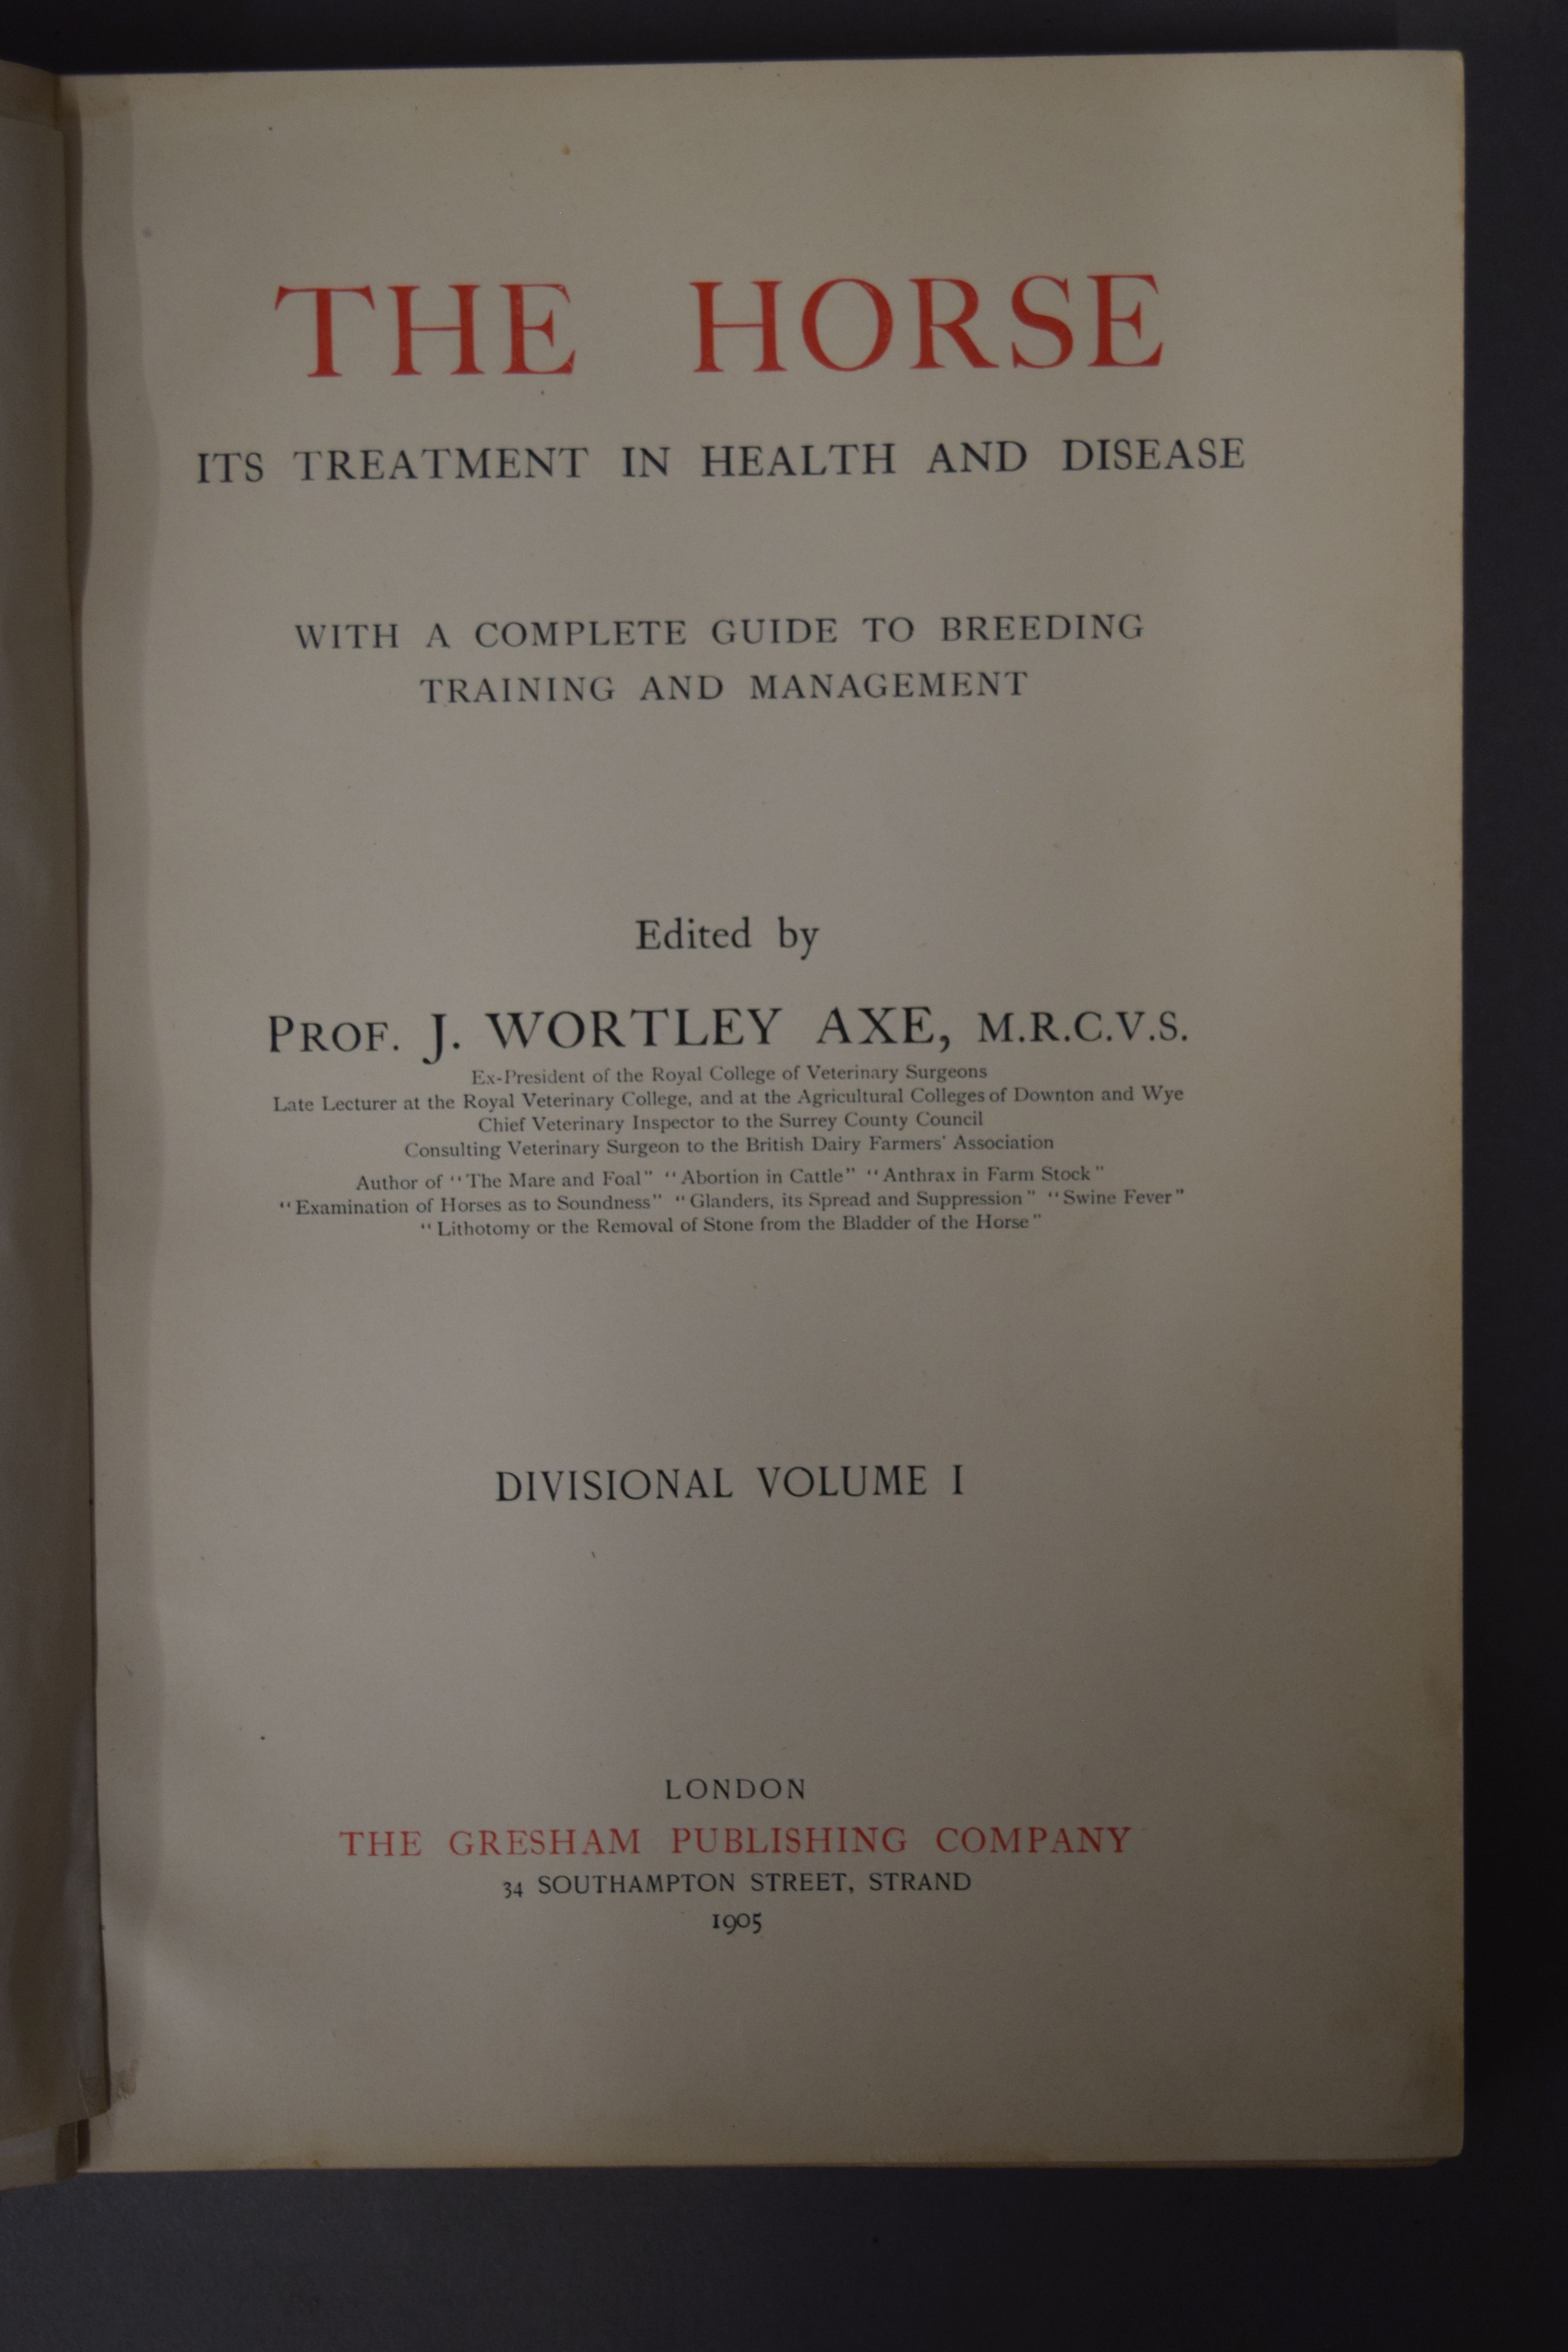 Wortley Axe, Professor J, The Horse Its Treatment in Health and Disease, volume 1. - Image 3 of 5